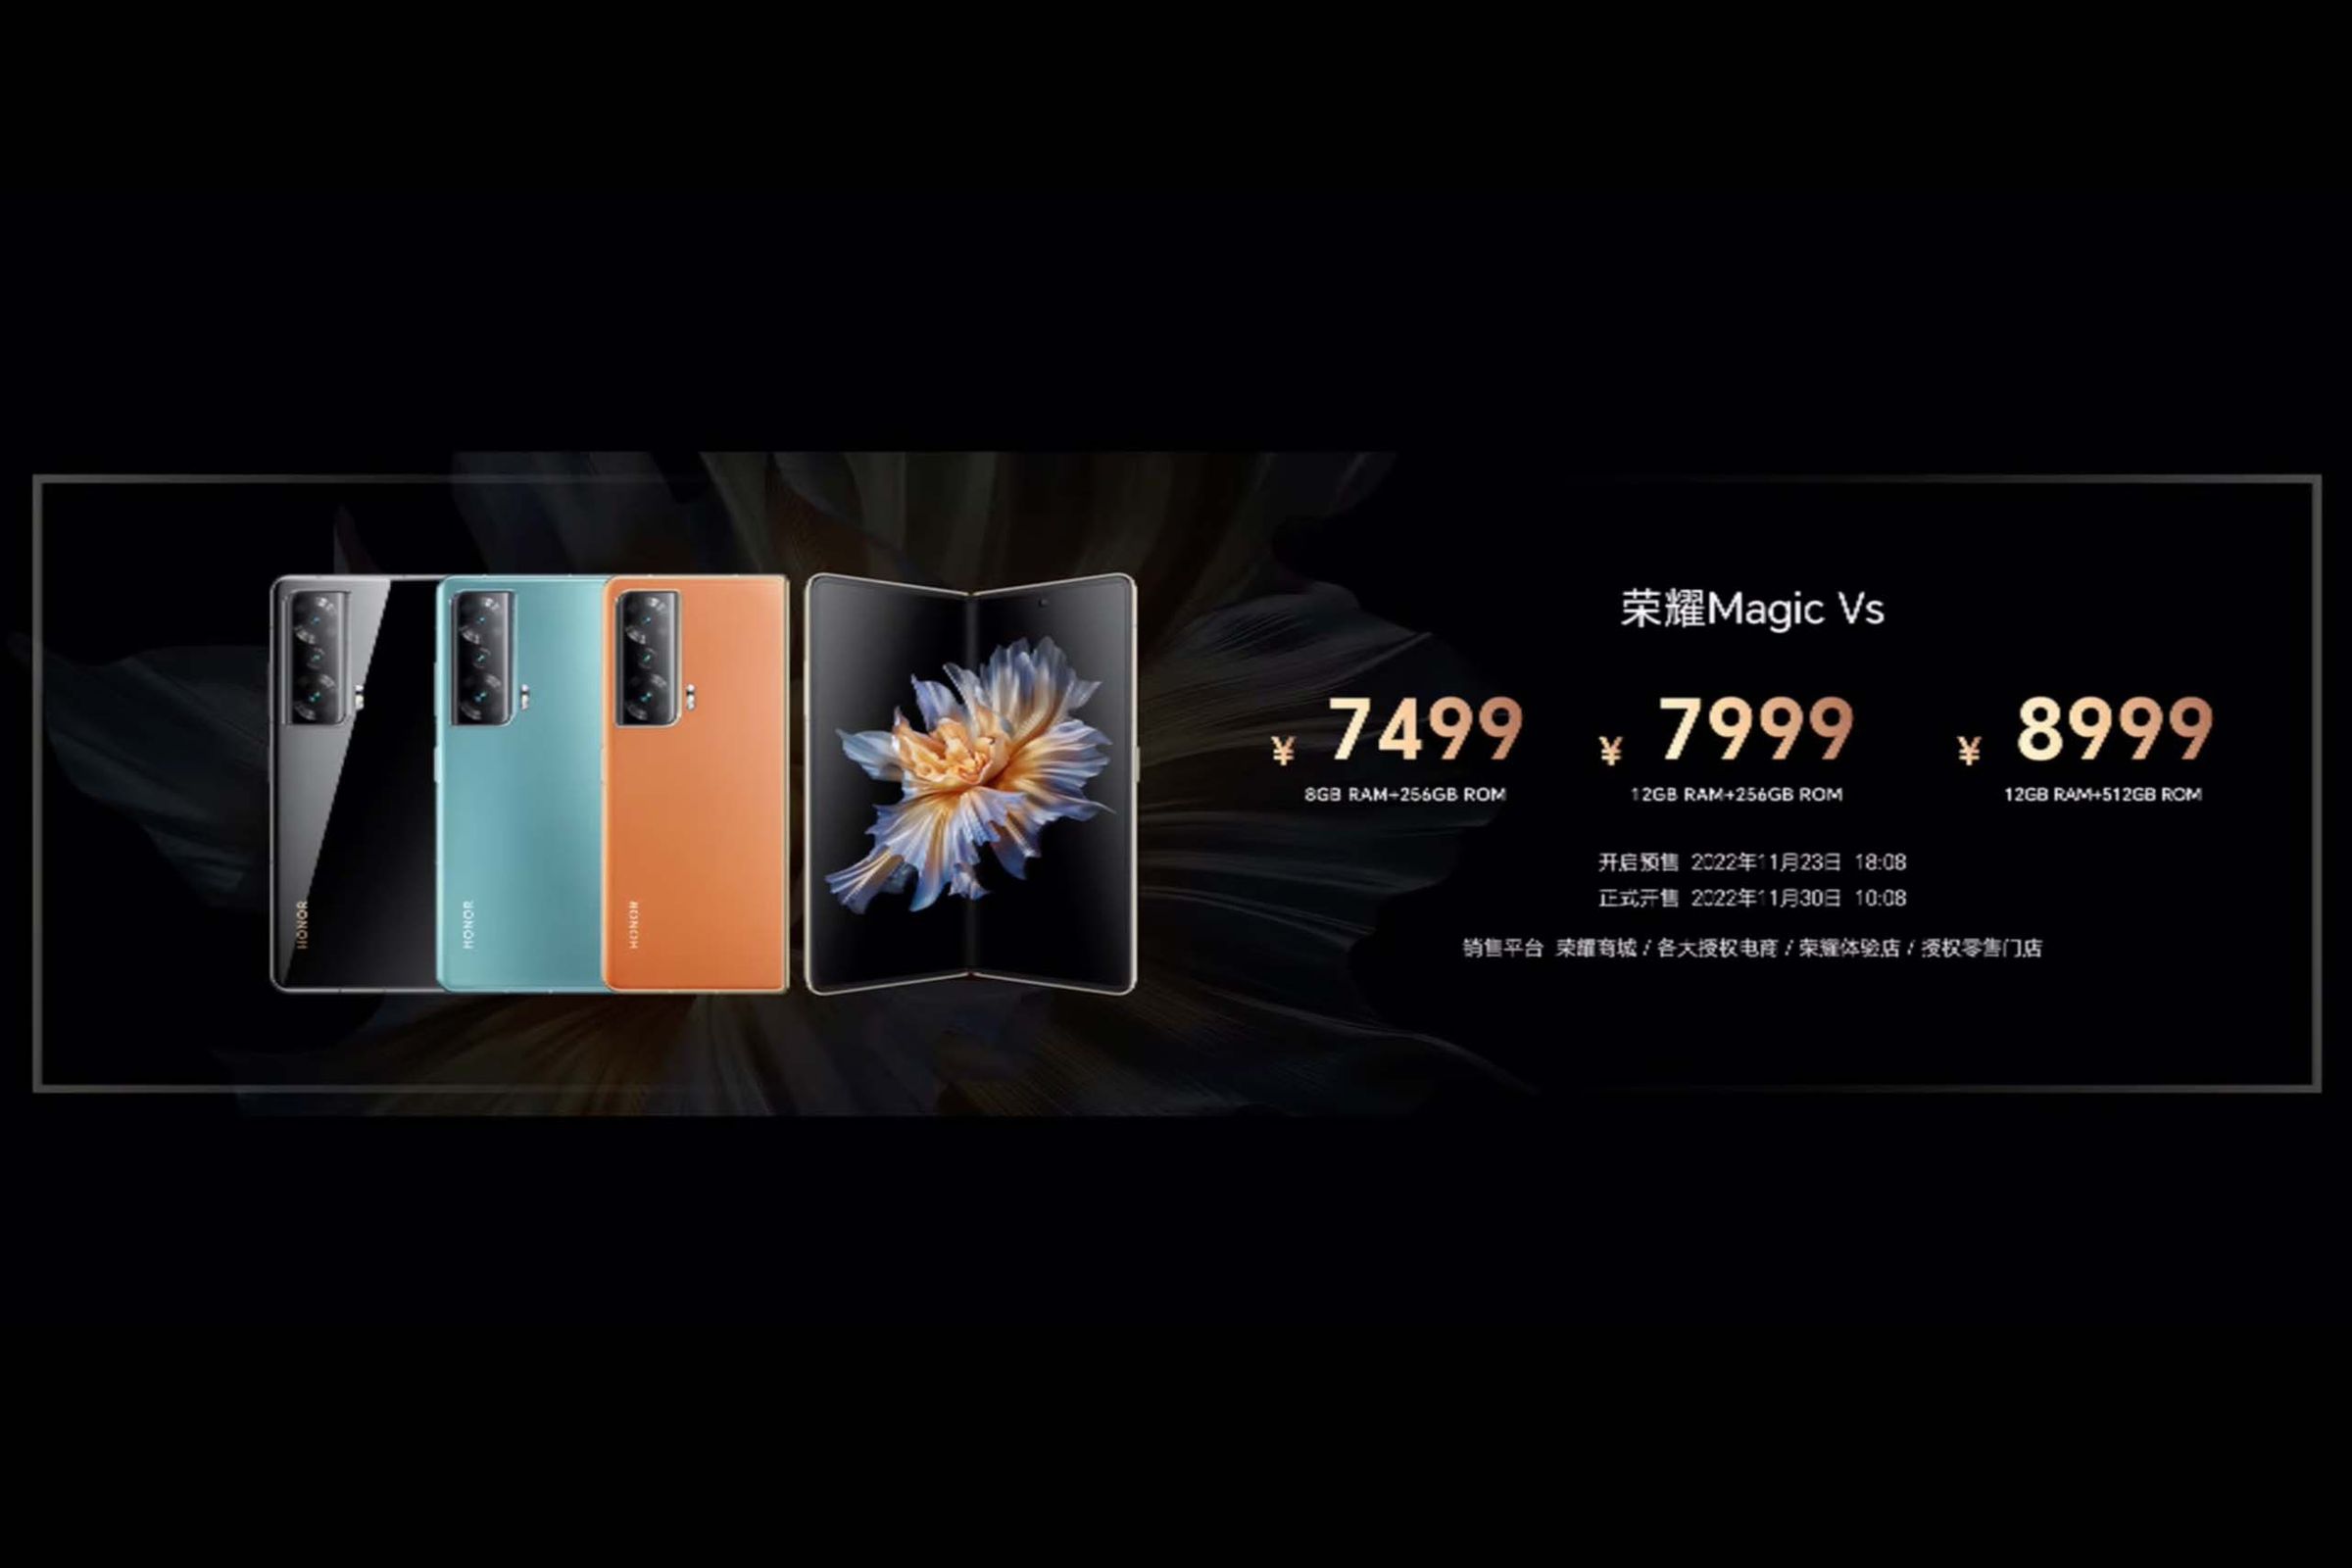 Chinese pricing for the Honor Magic VS.